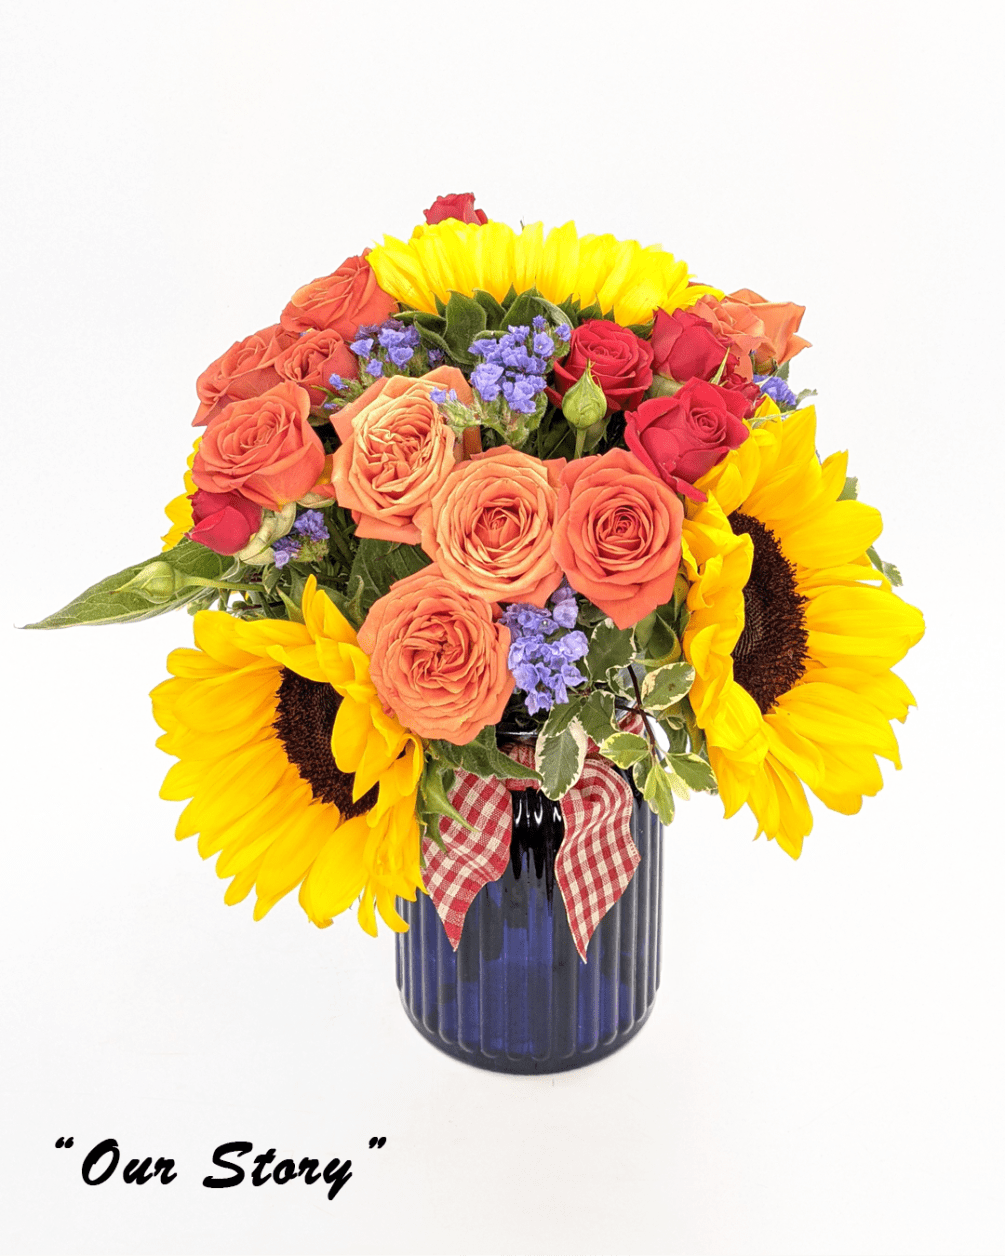 Hand-crafted mixed flower bouquet in a blue vase. Each purchased arrangement may